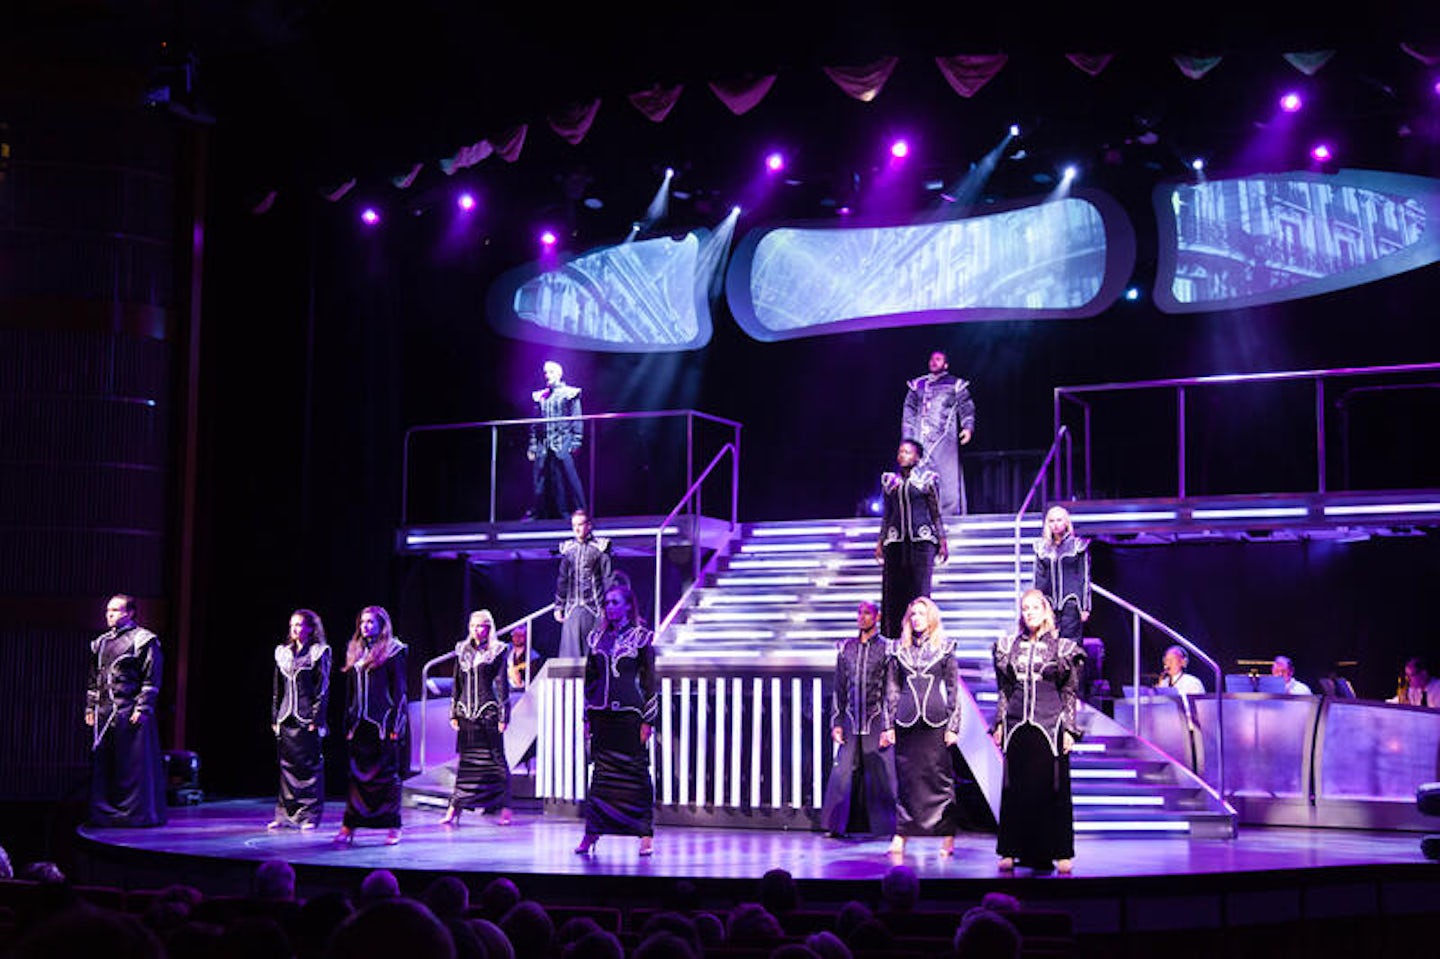 Broadway Nights on Celebrity Silhouette